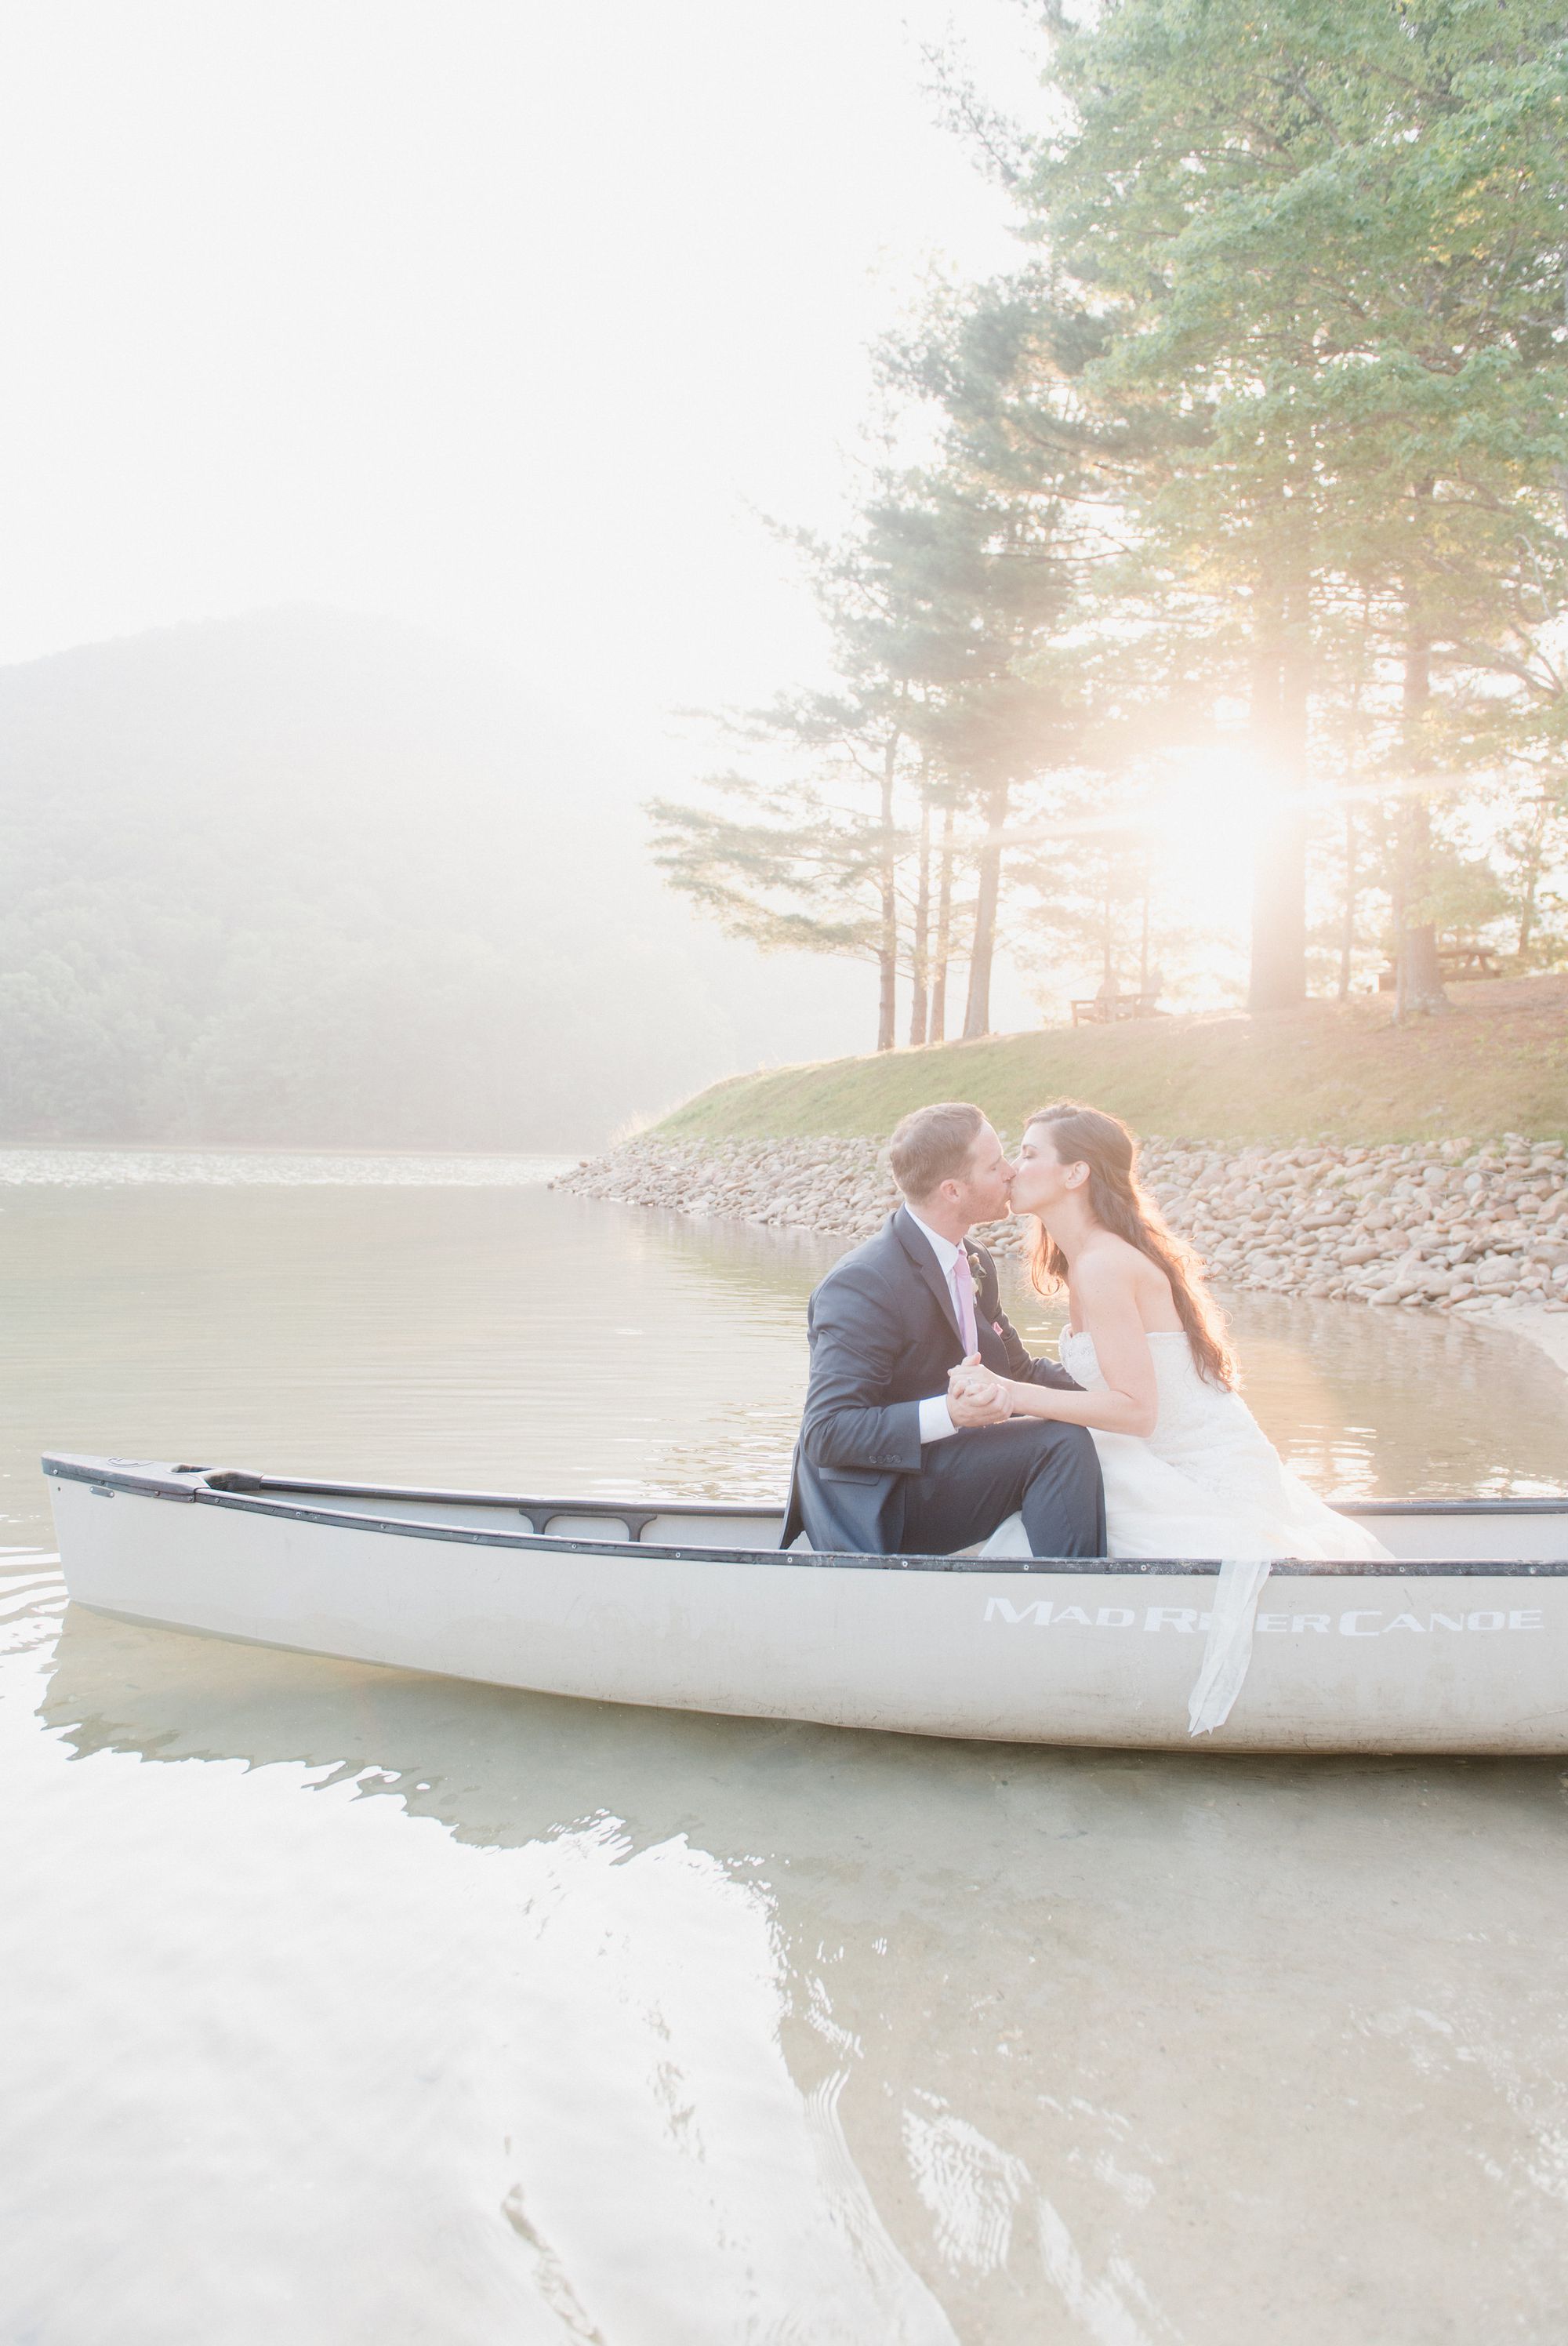 morning-after-wedding-session-in-canoe 26